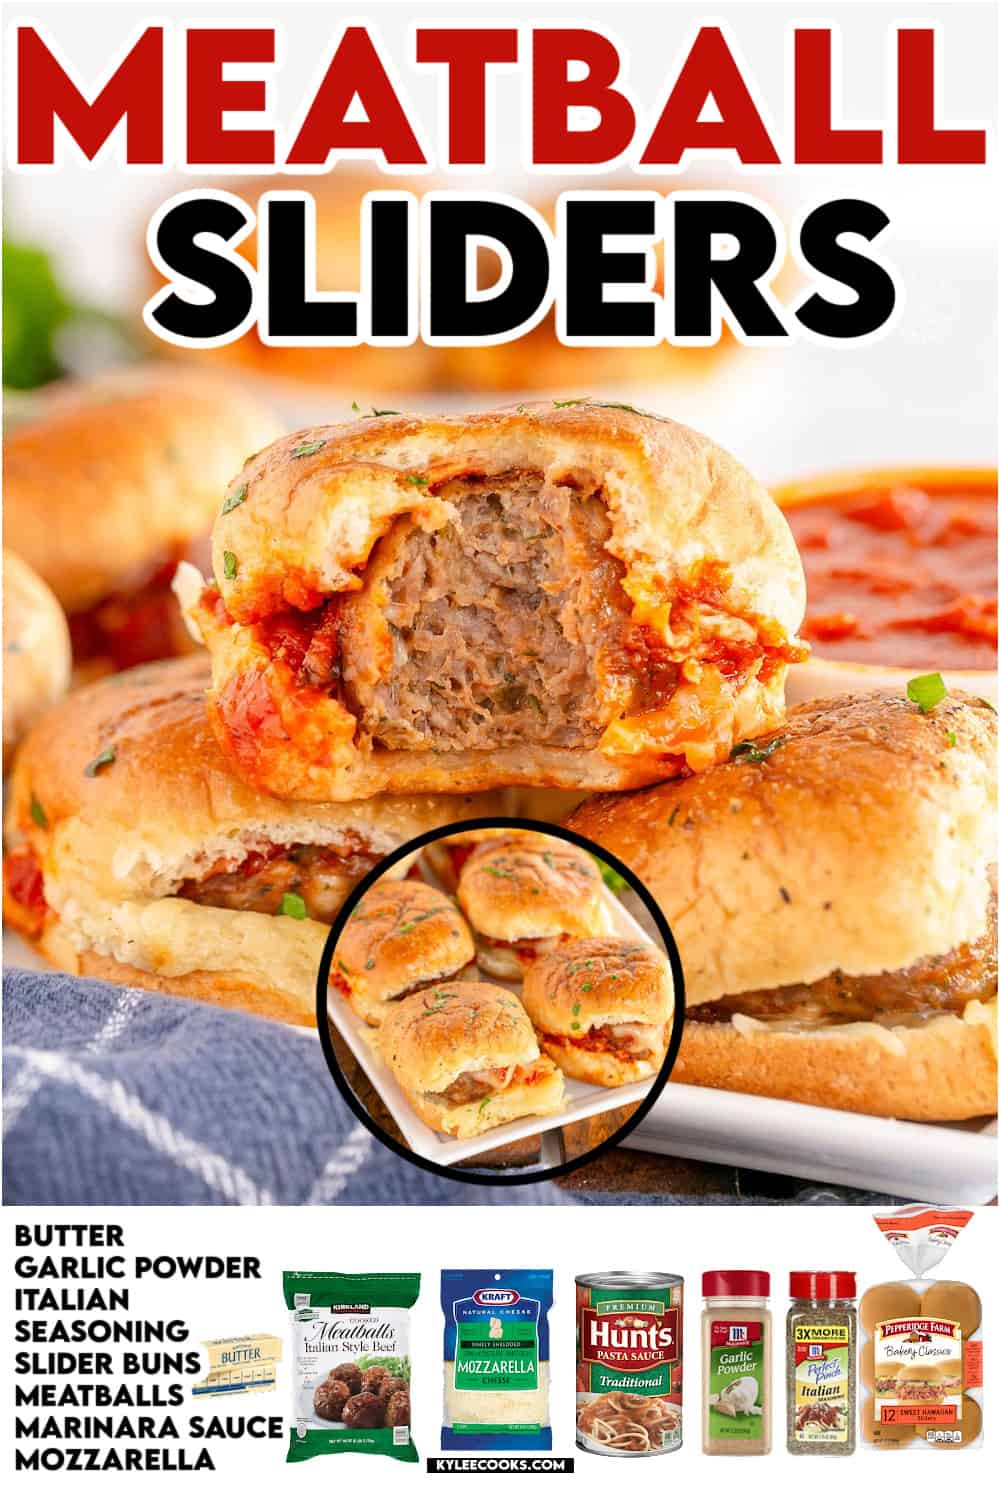 a meatball slider cut in half with recipe name and ingredients overlaid in text and images.